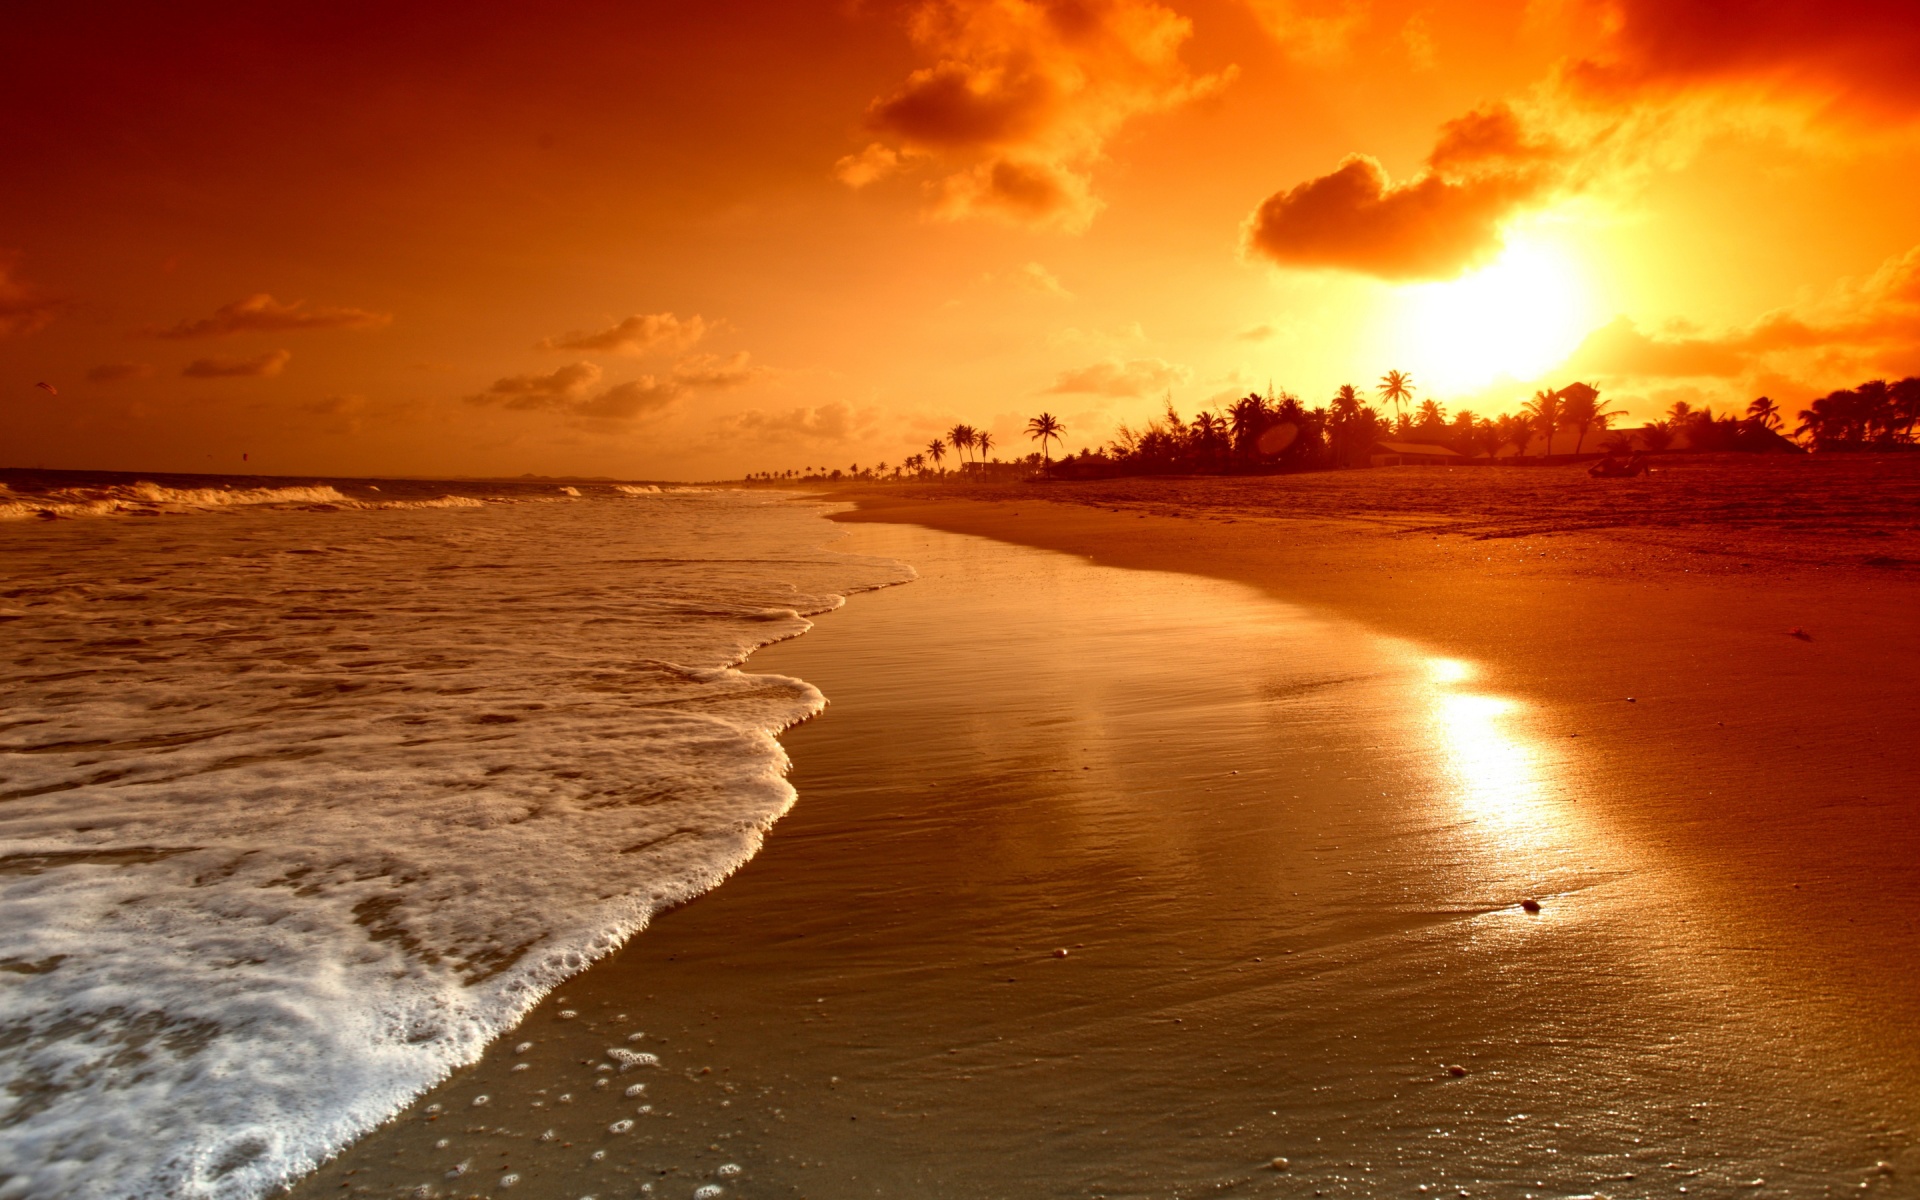 Gallery For Gt Beach Sunset Background HD